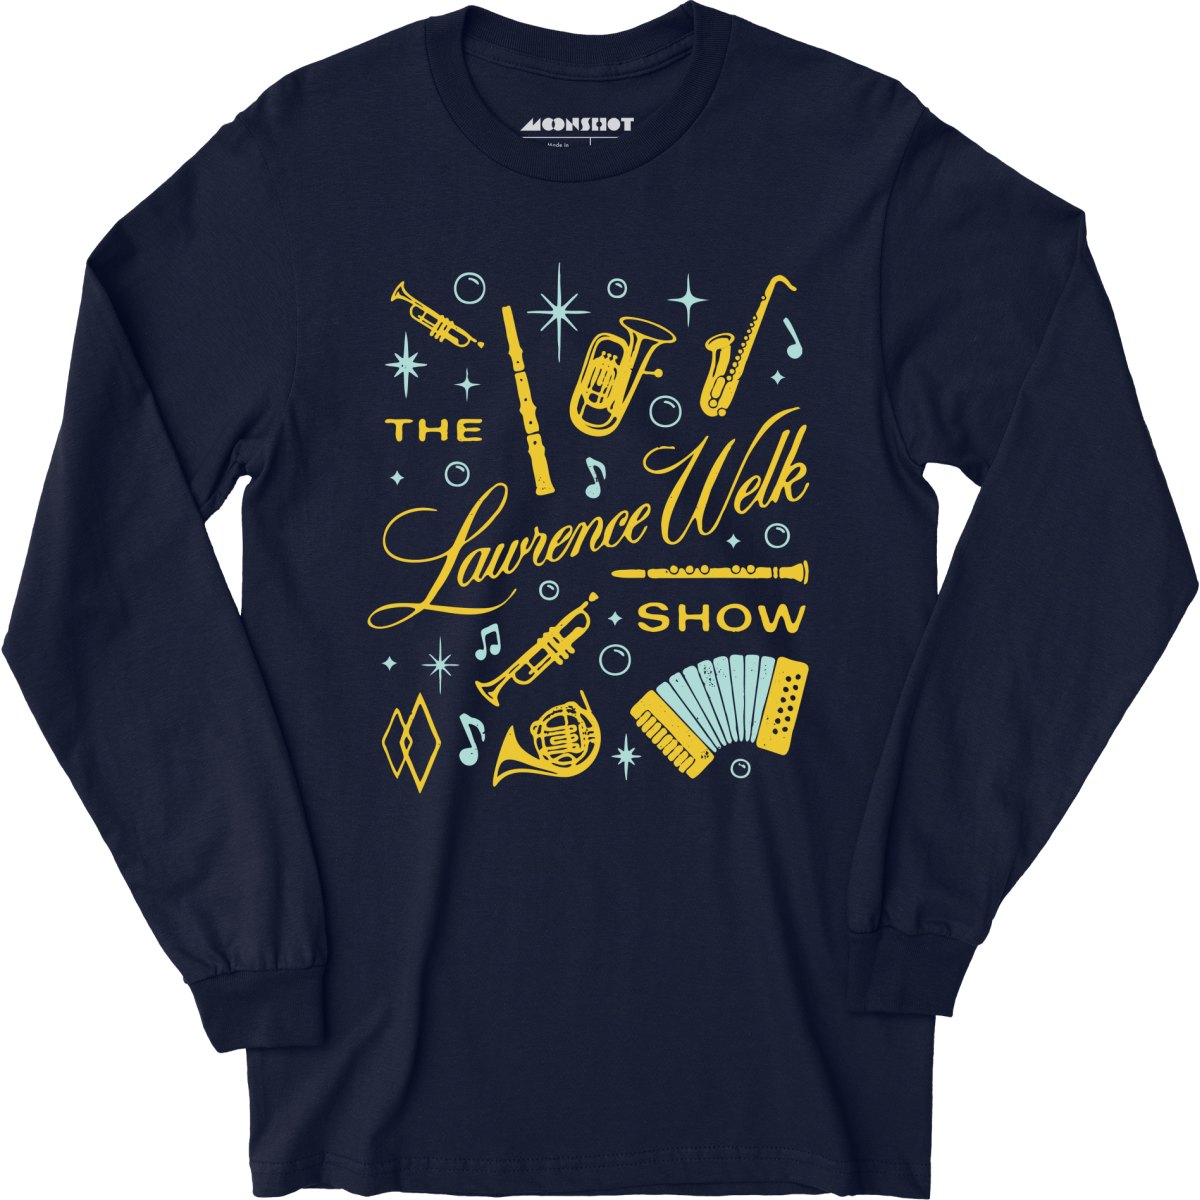 The Lawrence Welk Show - Long Sleeve T-Shirt